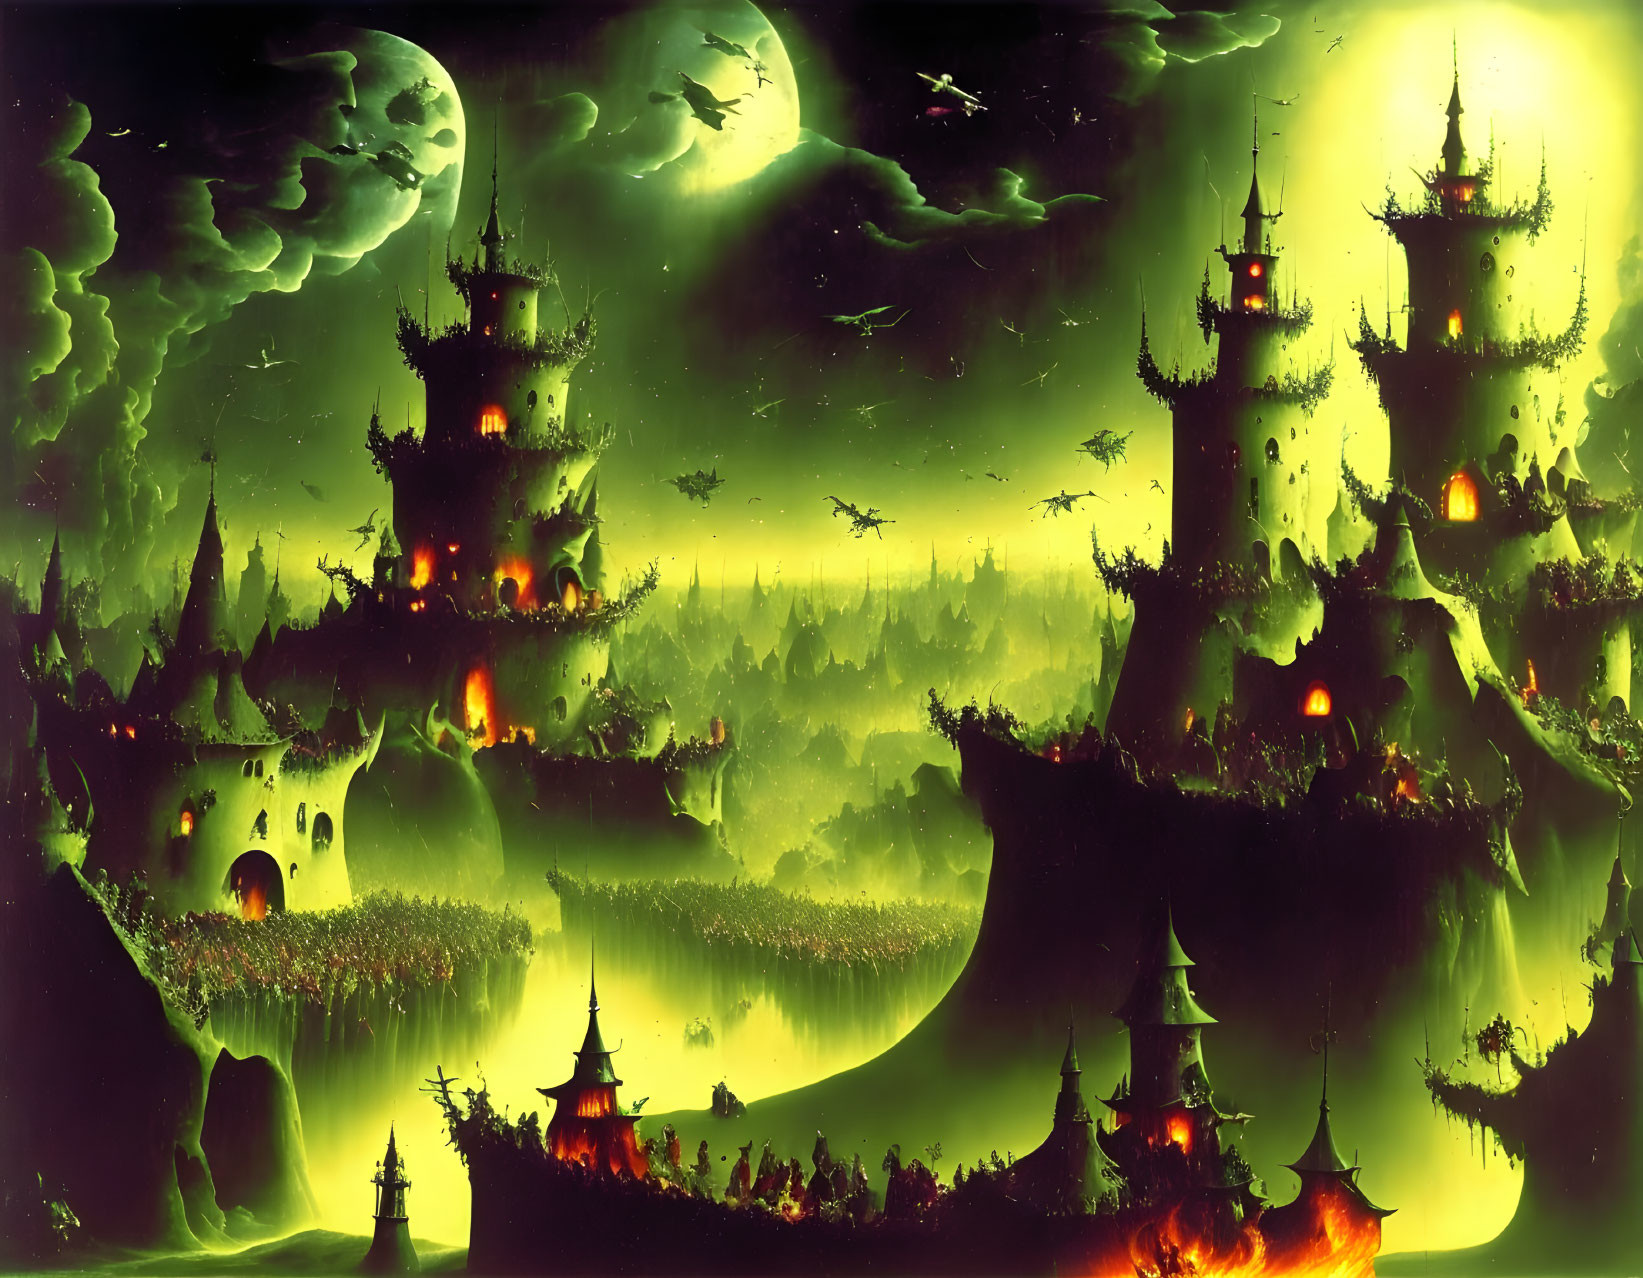 Fantastical green landscape with spired castles, floating islands, and dragons at night